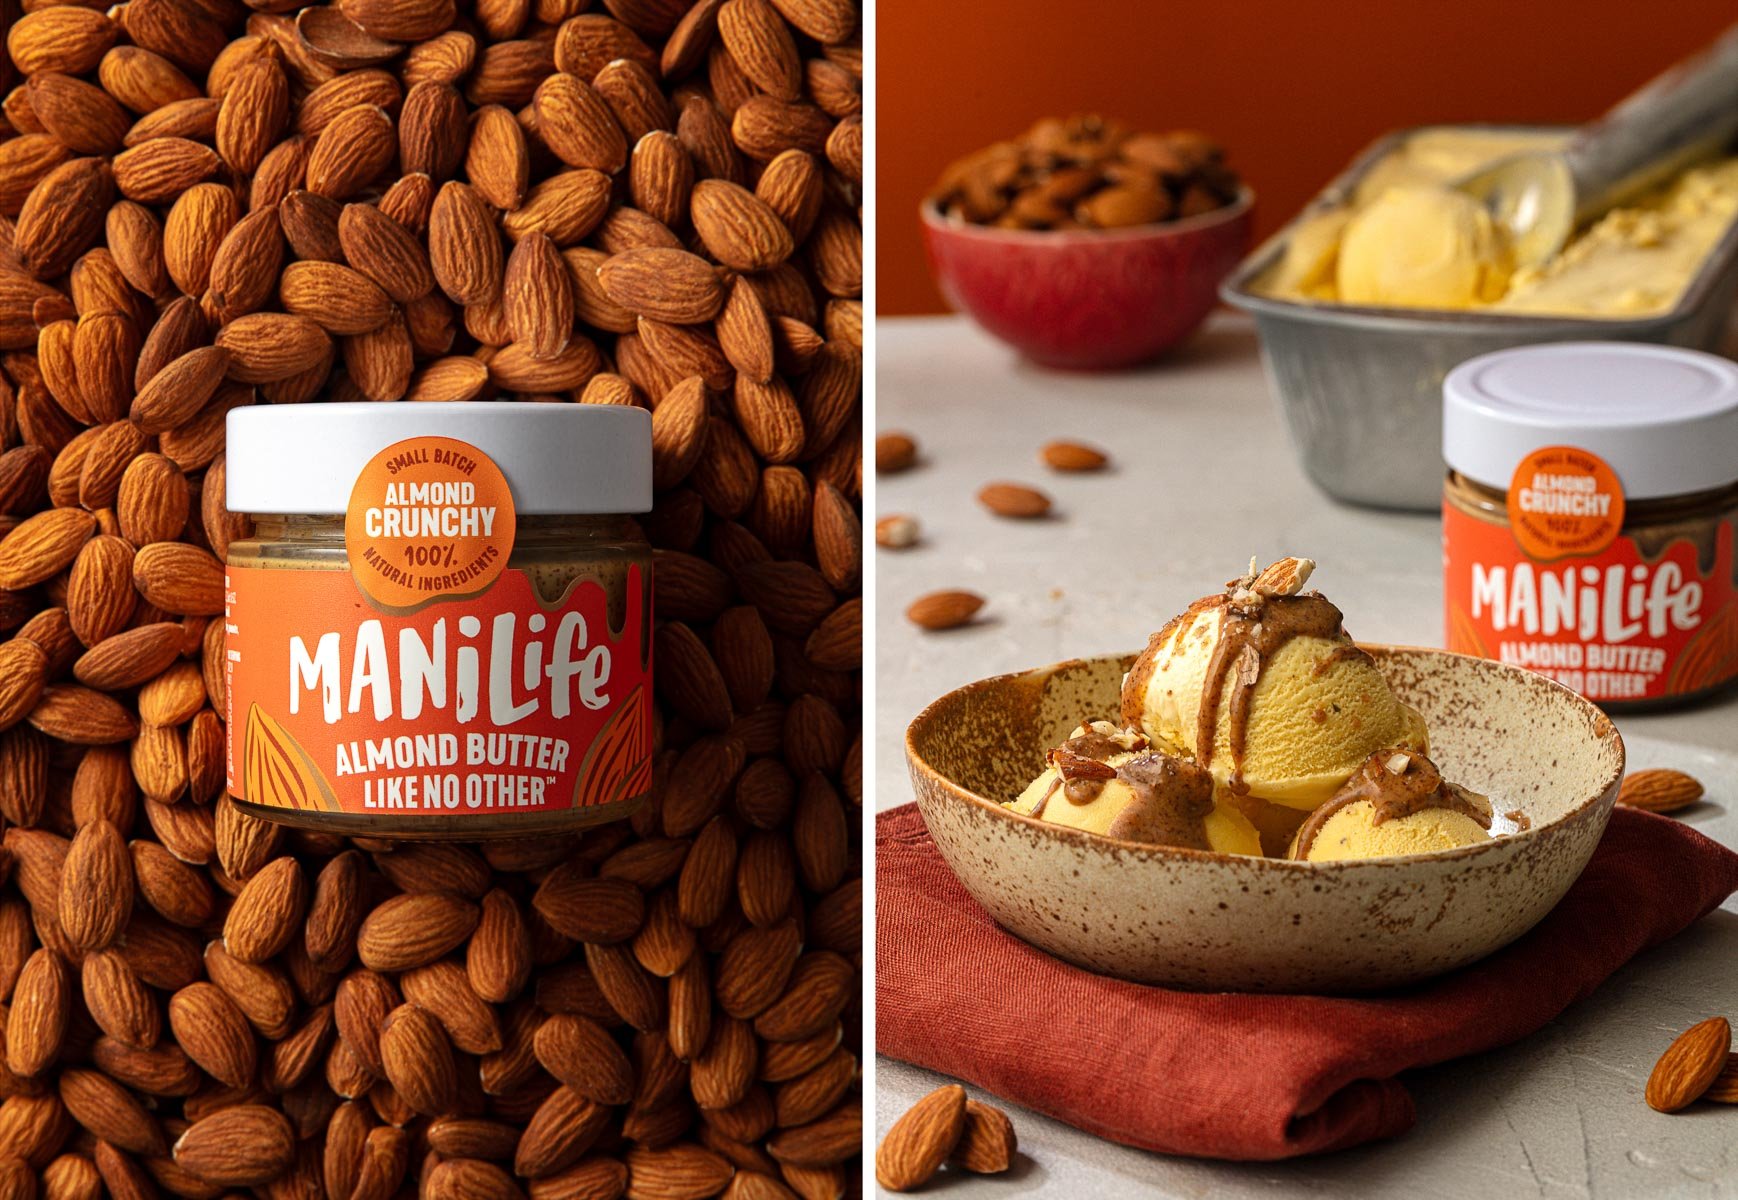 Hikaru Funnell Photography - Food Photography - ManiLife Almond Butter - 01-02-24 - 19.jpg